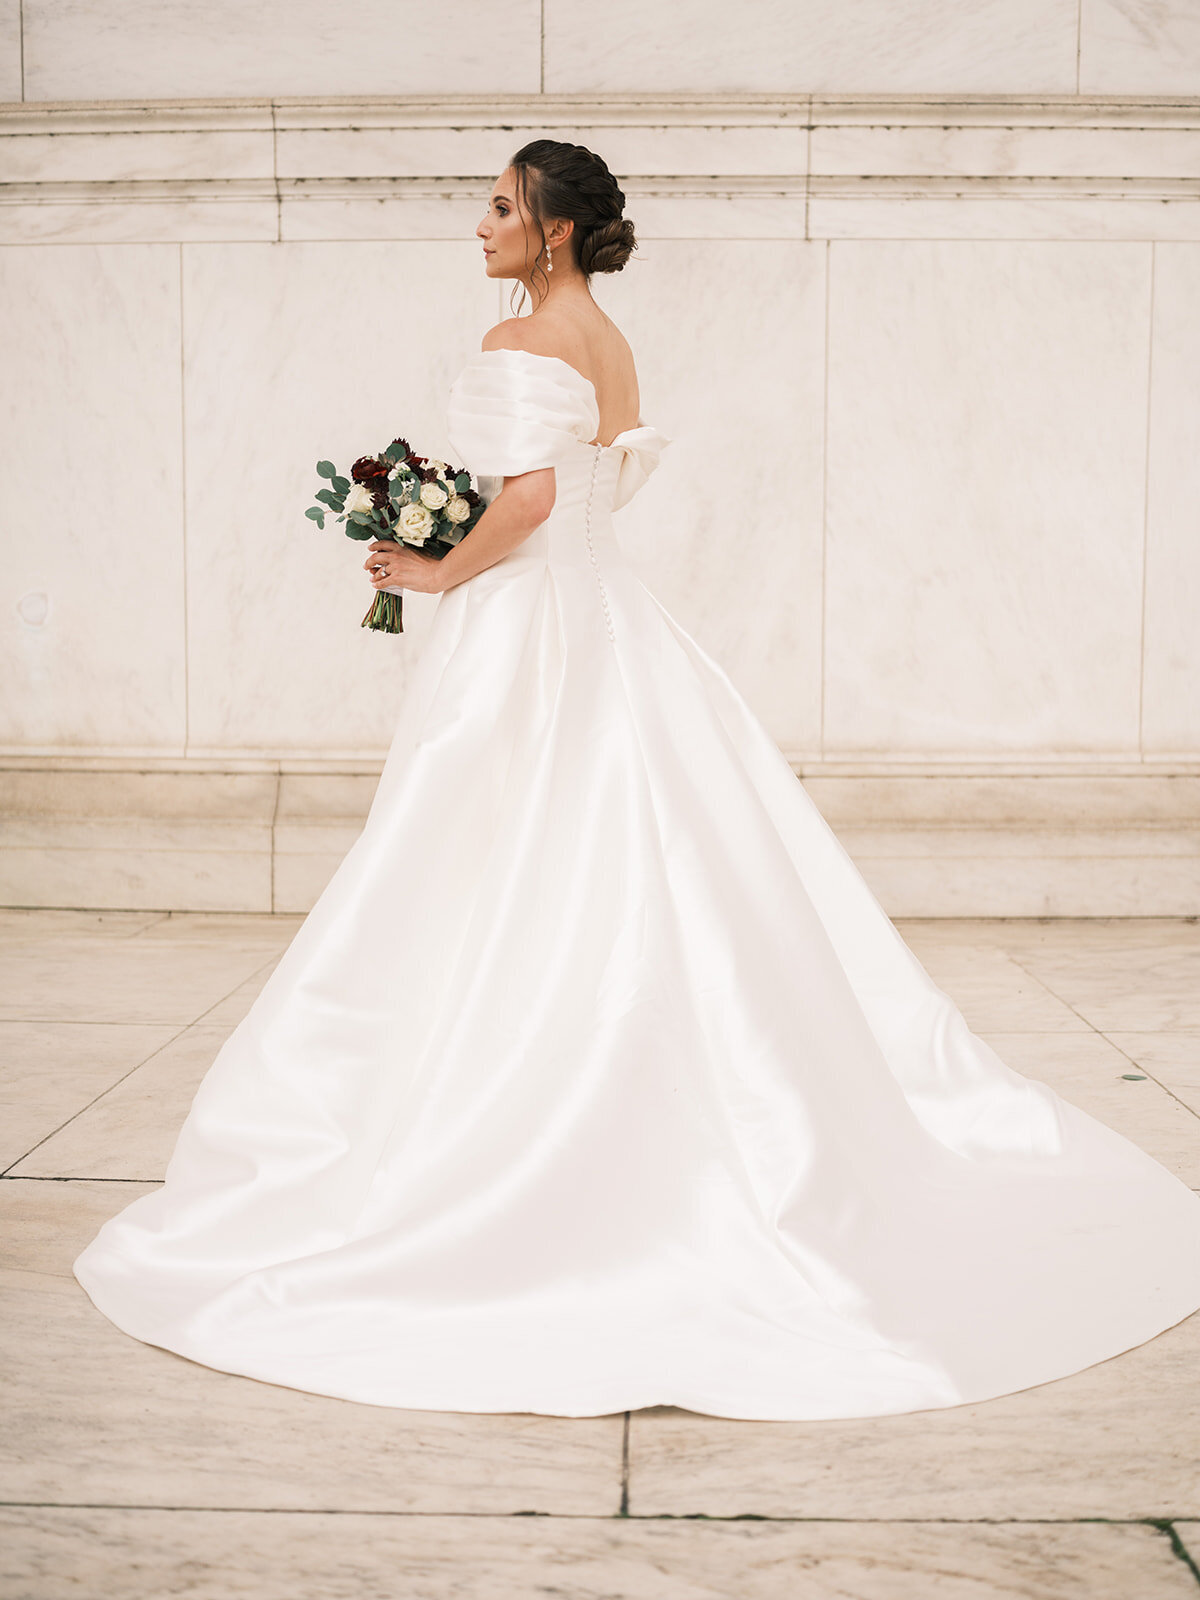 agriffin-events-renwick-gallery-smithsonian-dc-wedding-planner-37